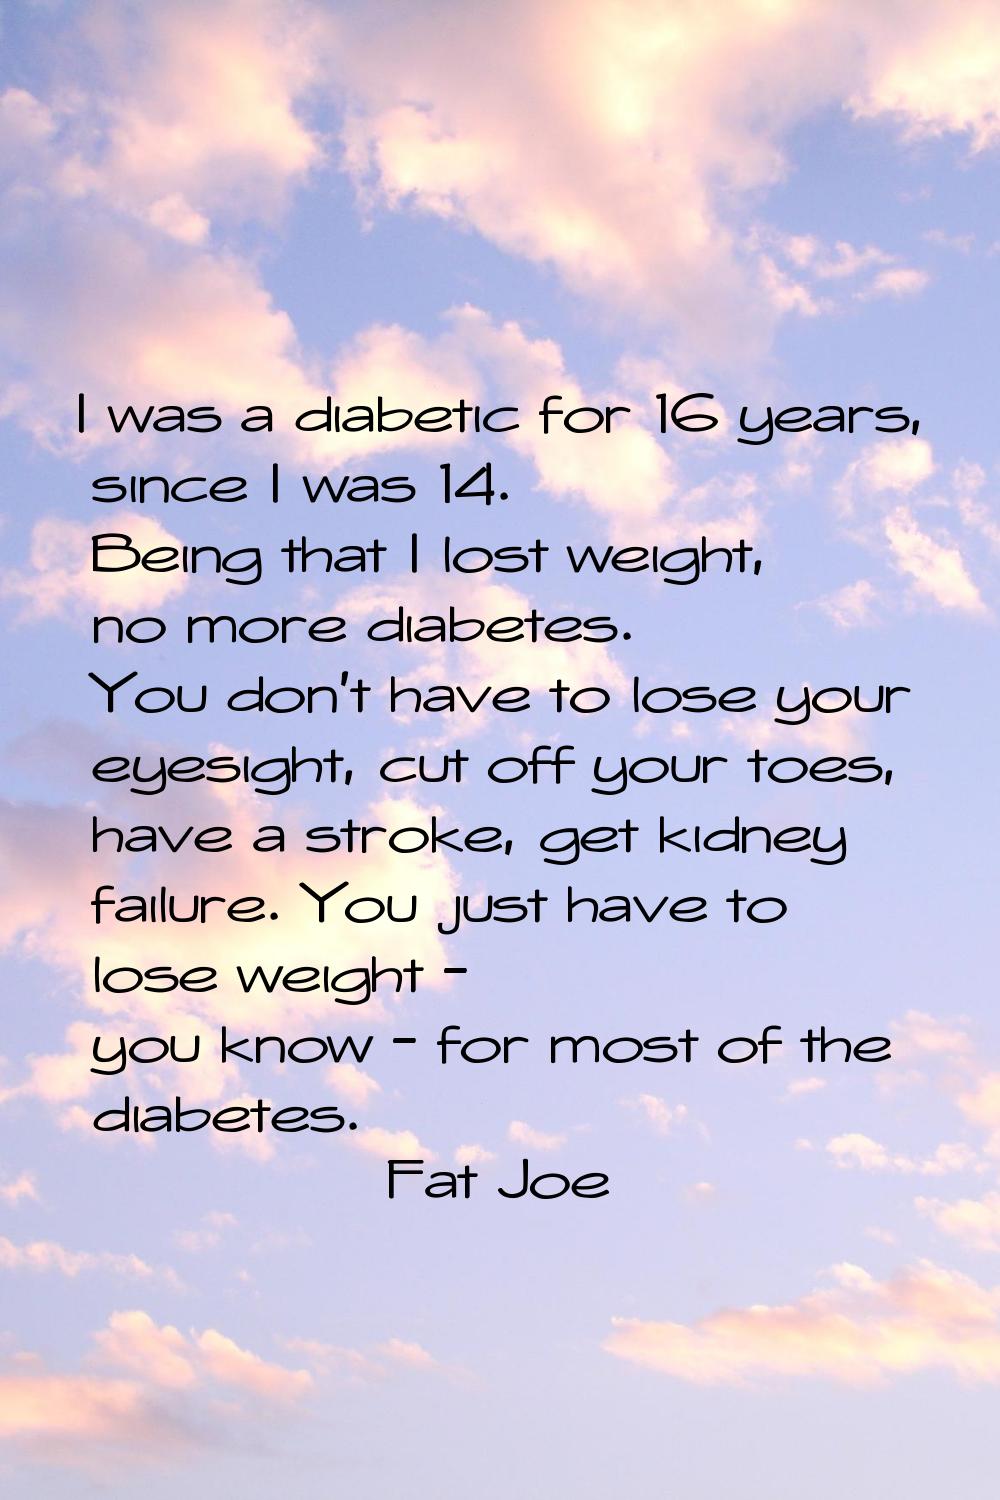 I was a diabetic for 16 years, since I was 14. Being that I lost weight, no more diabetes. You don'